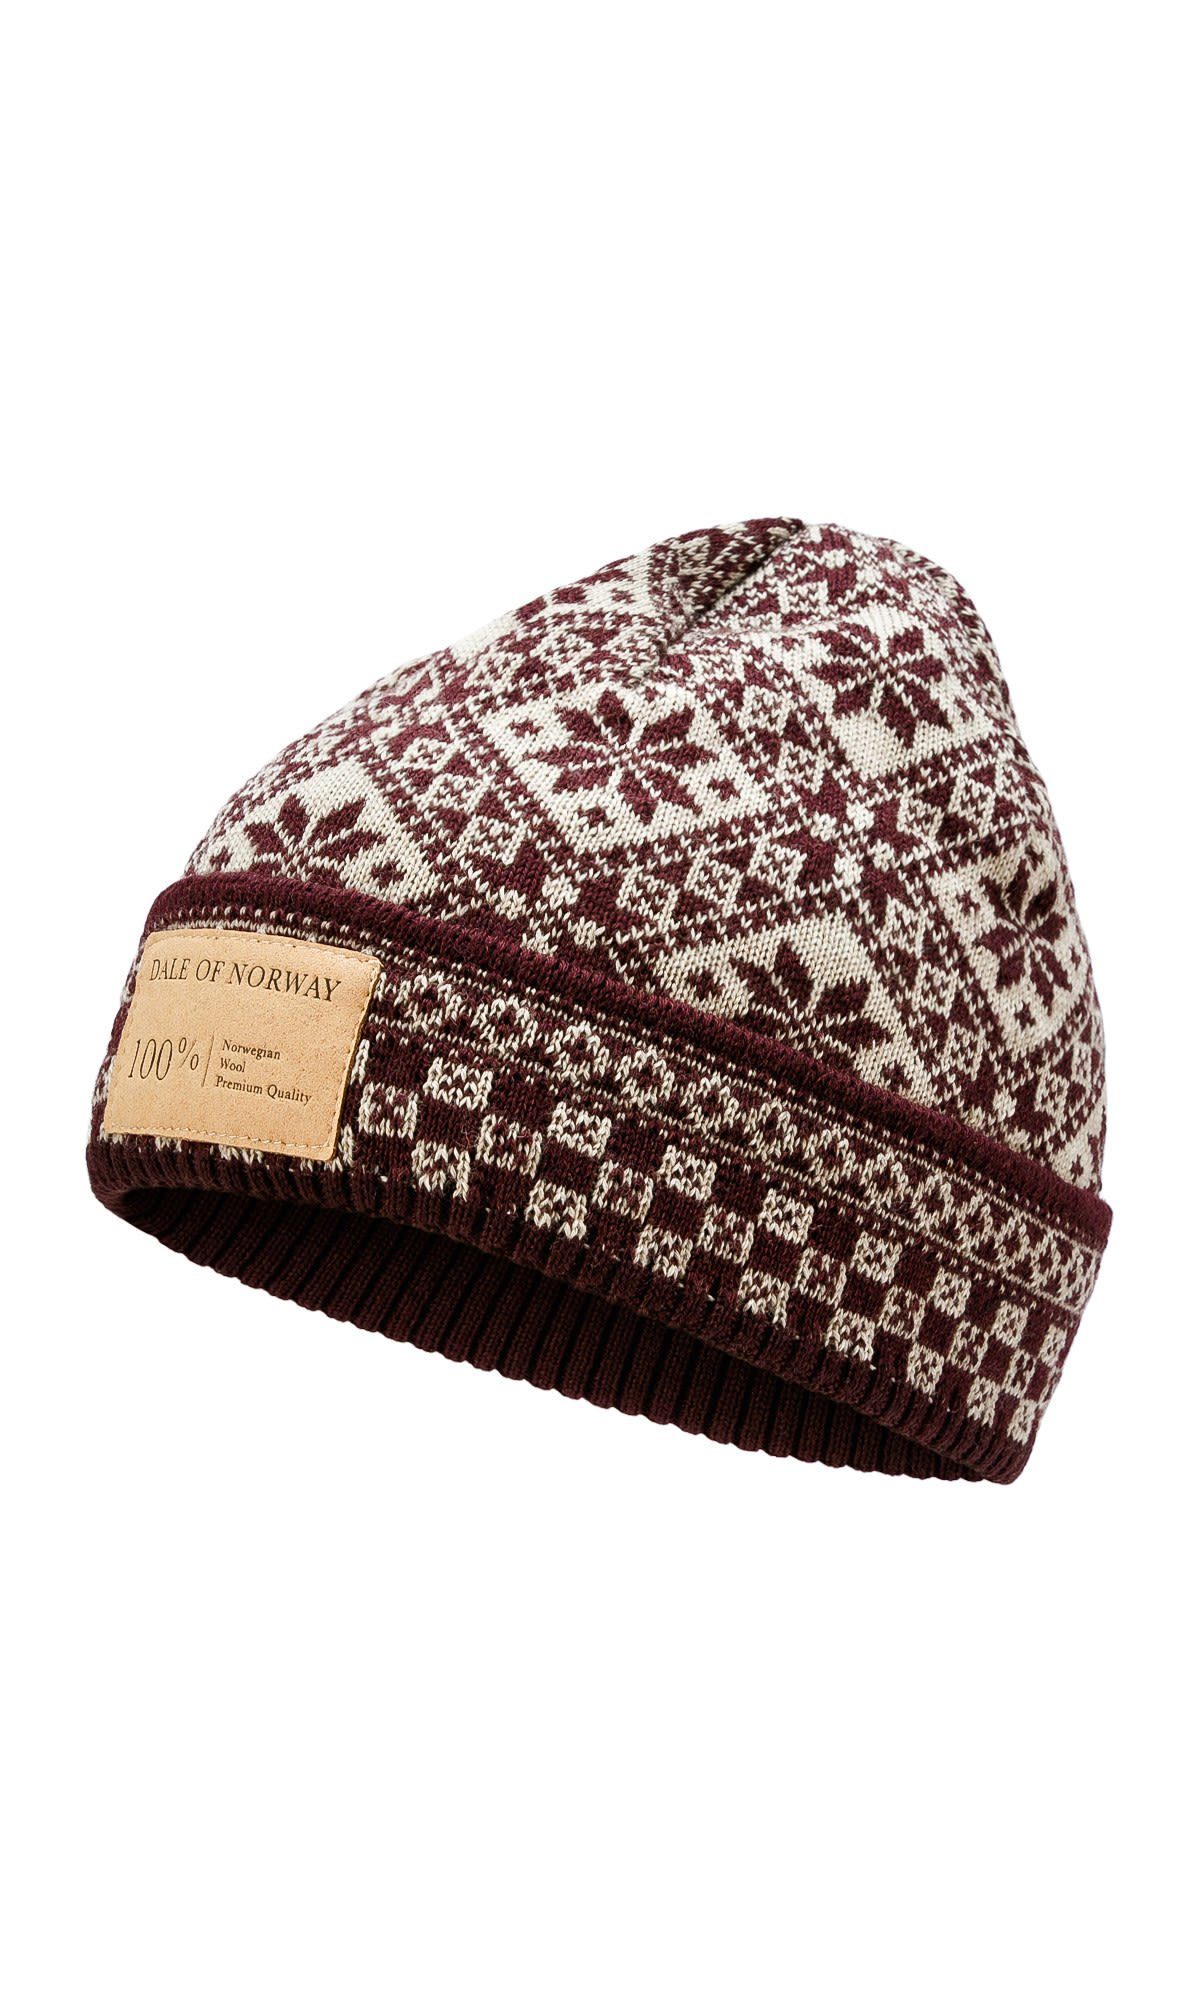 Of Norway Dale Accessoires of Dale Norway Bjoroy Sand Hat Aubergine Beanie